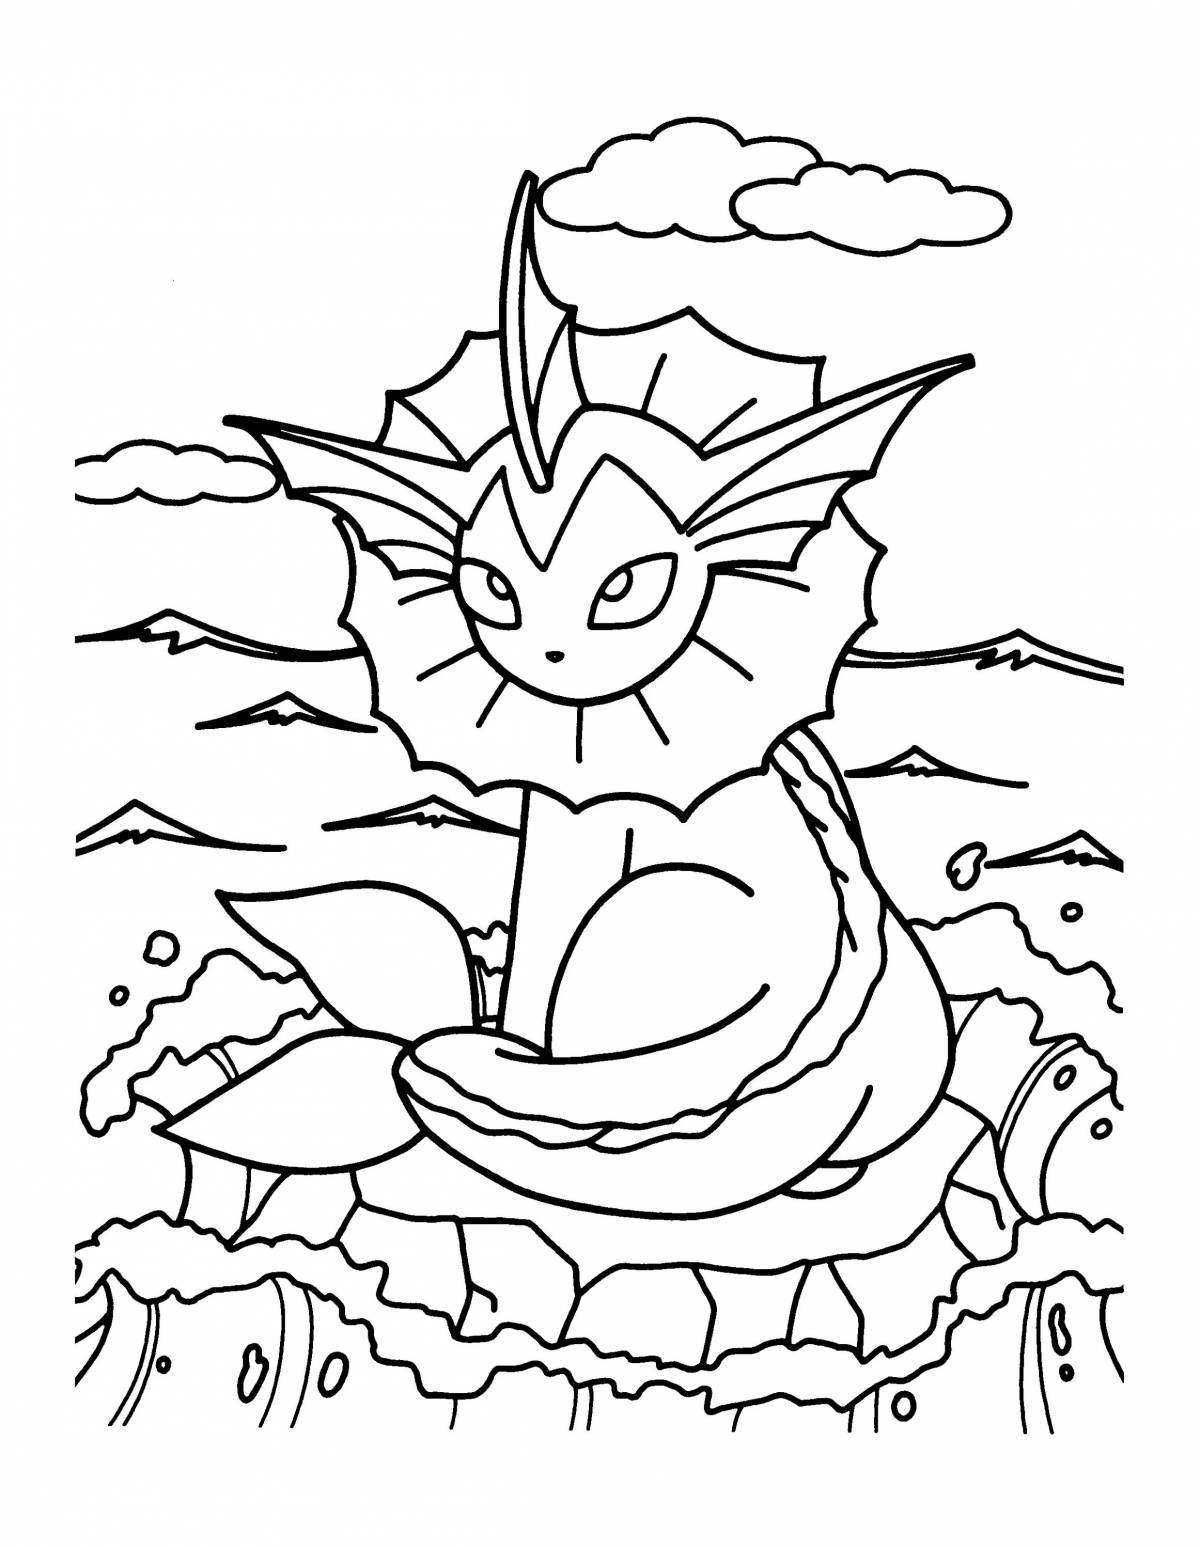 Awesome pokemon coloring book